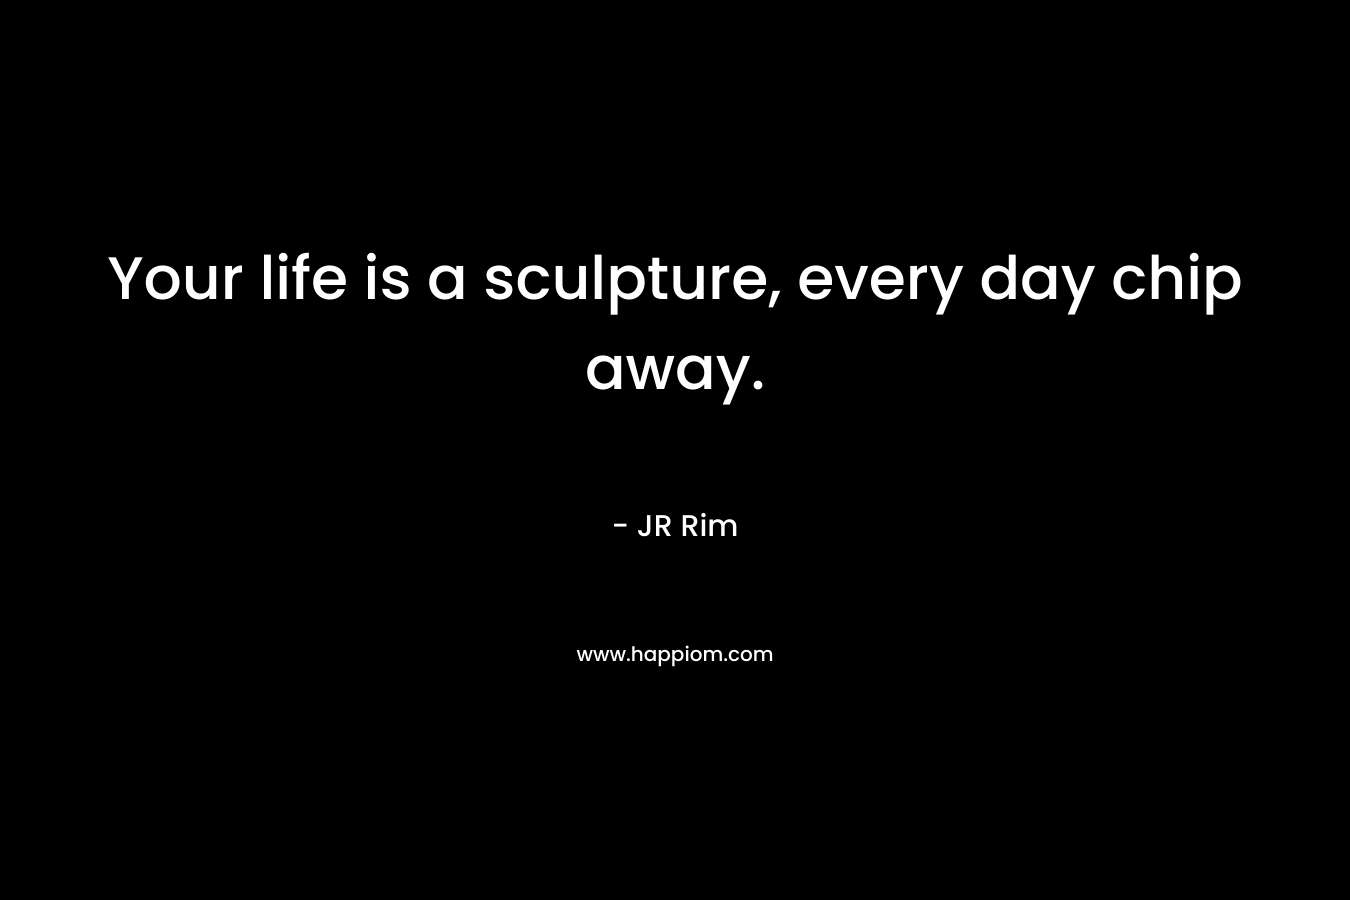 Your life is a sculpture, every day chip away.